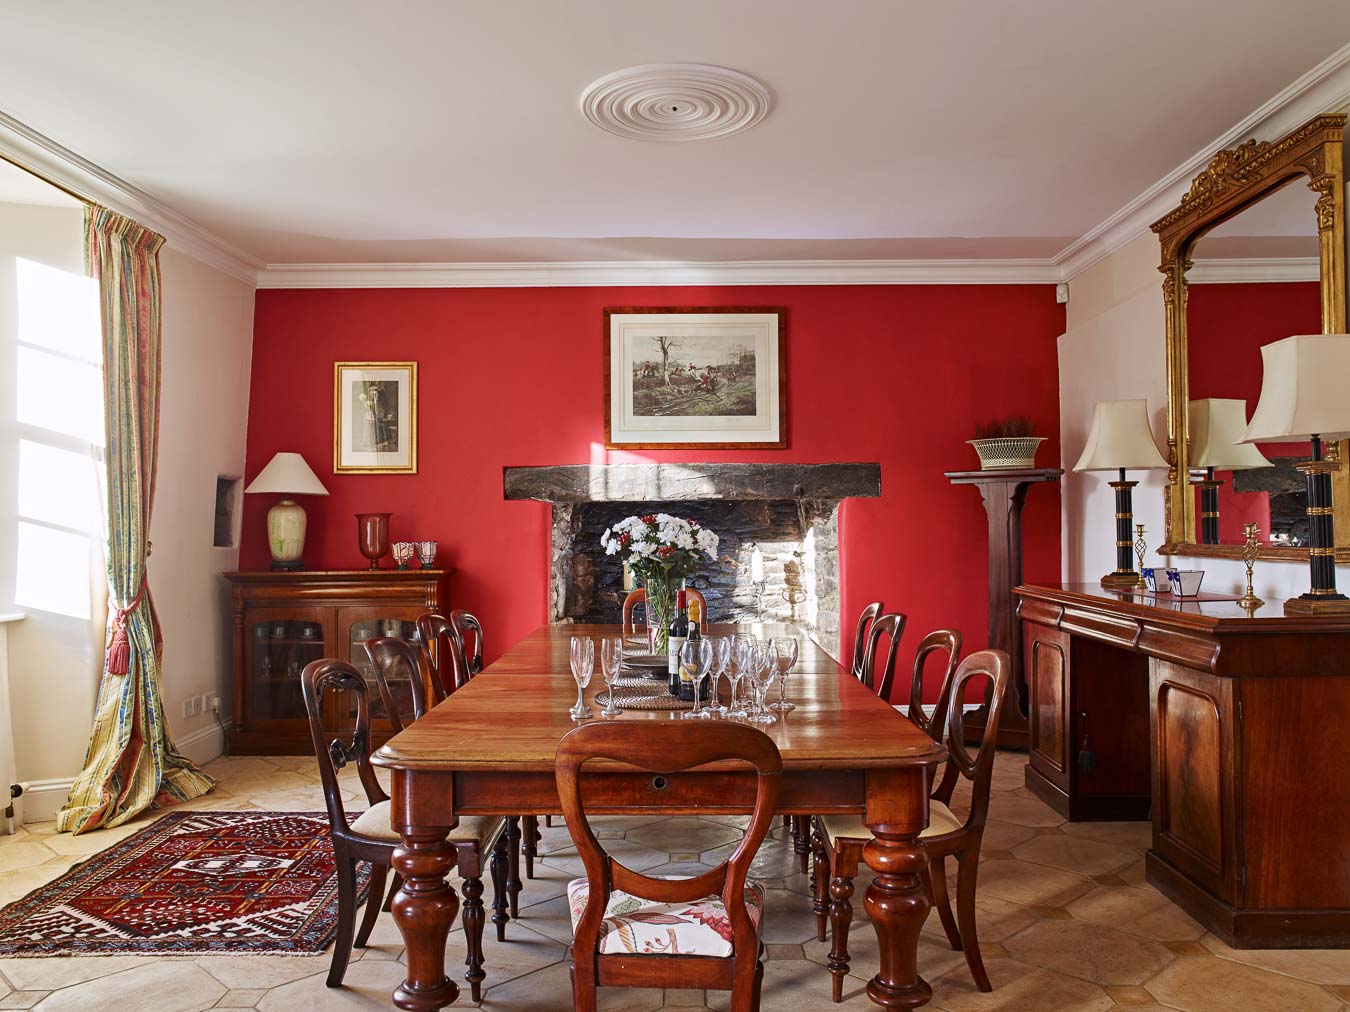 The grand Red dining room of Flear House at Flear Farm.